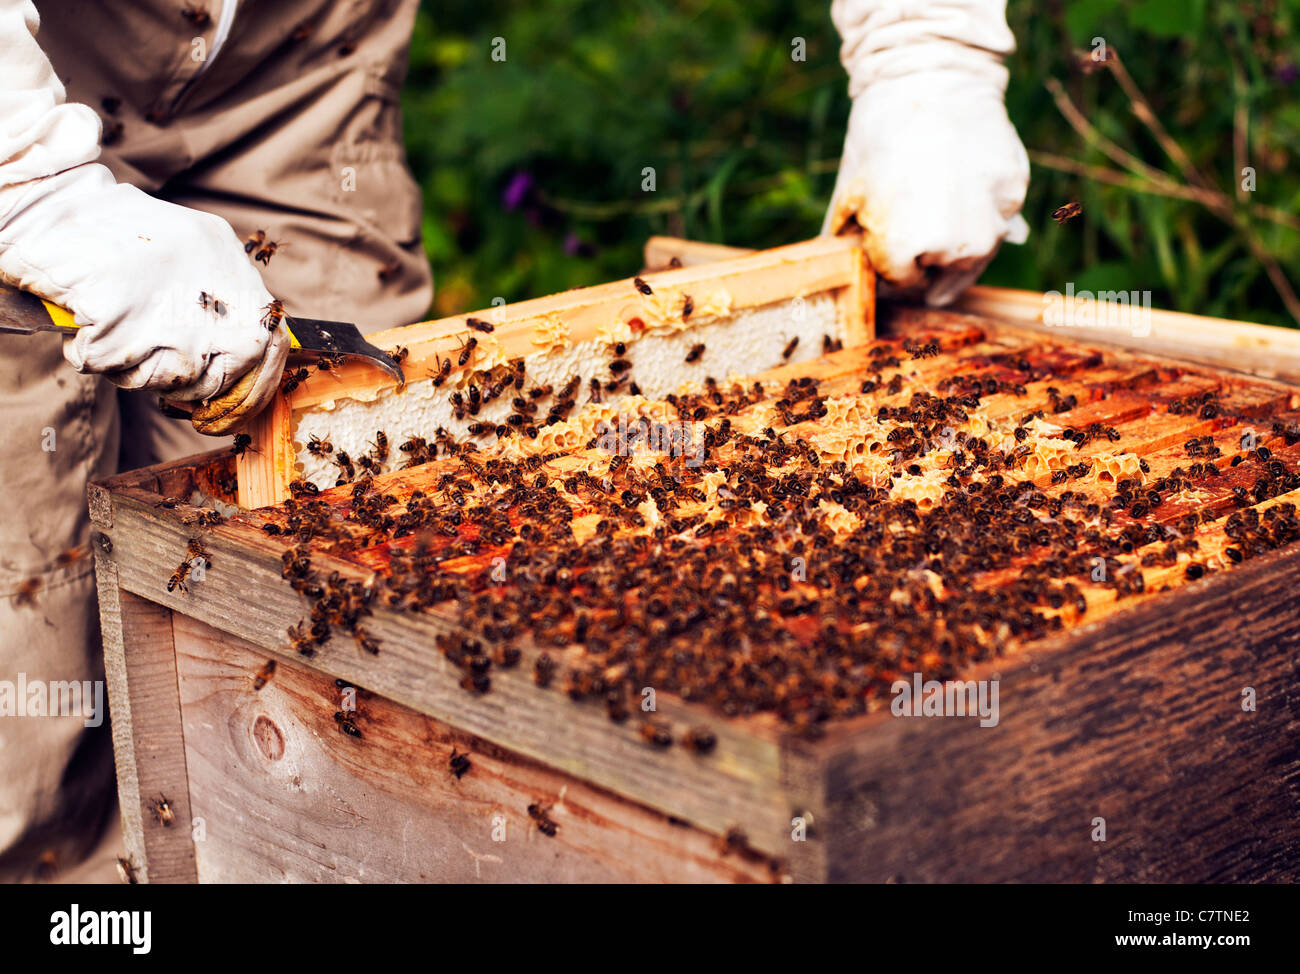 beekeeper taking a frame out of a beehive with bees buzzing around Stock Photo